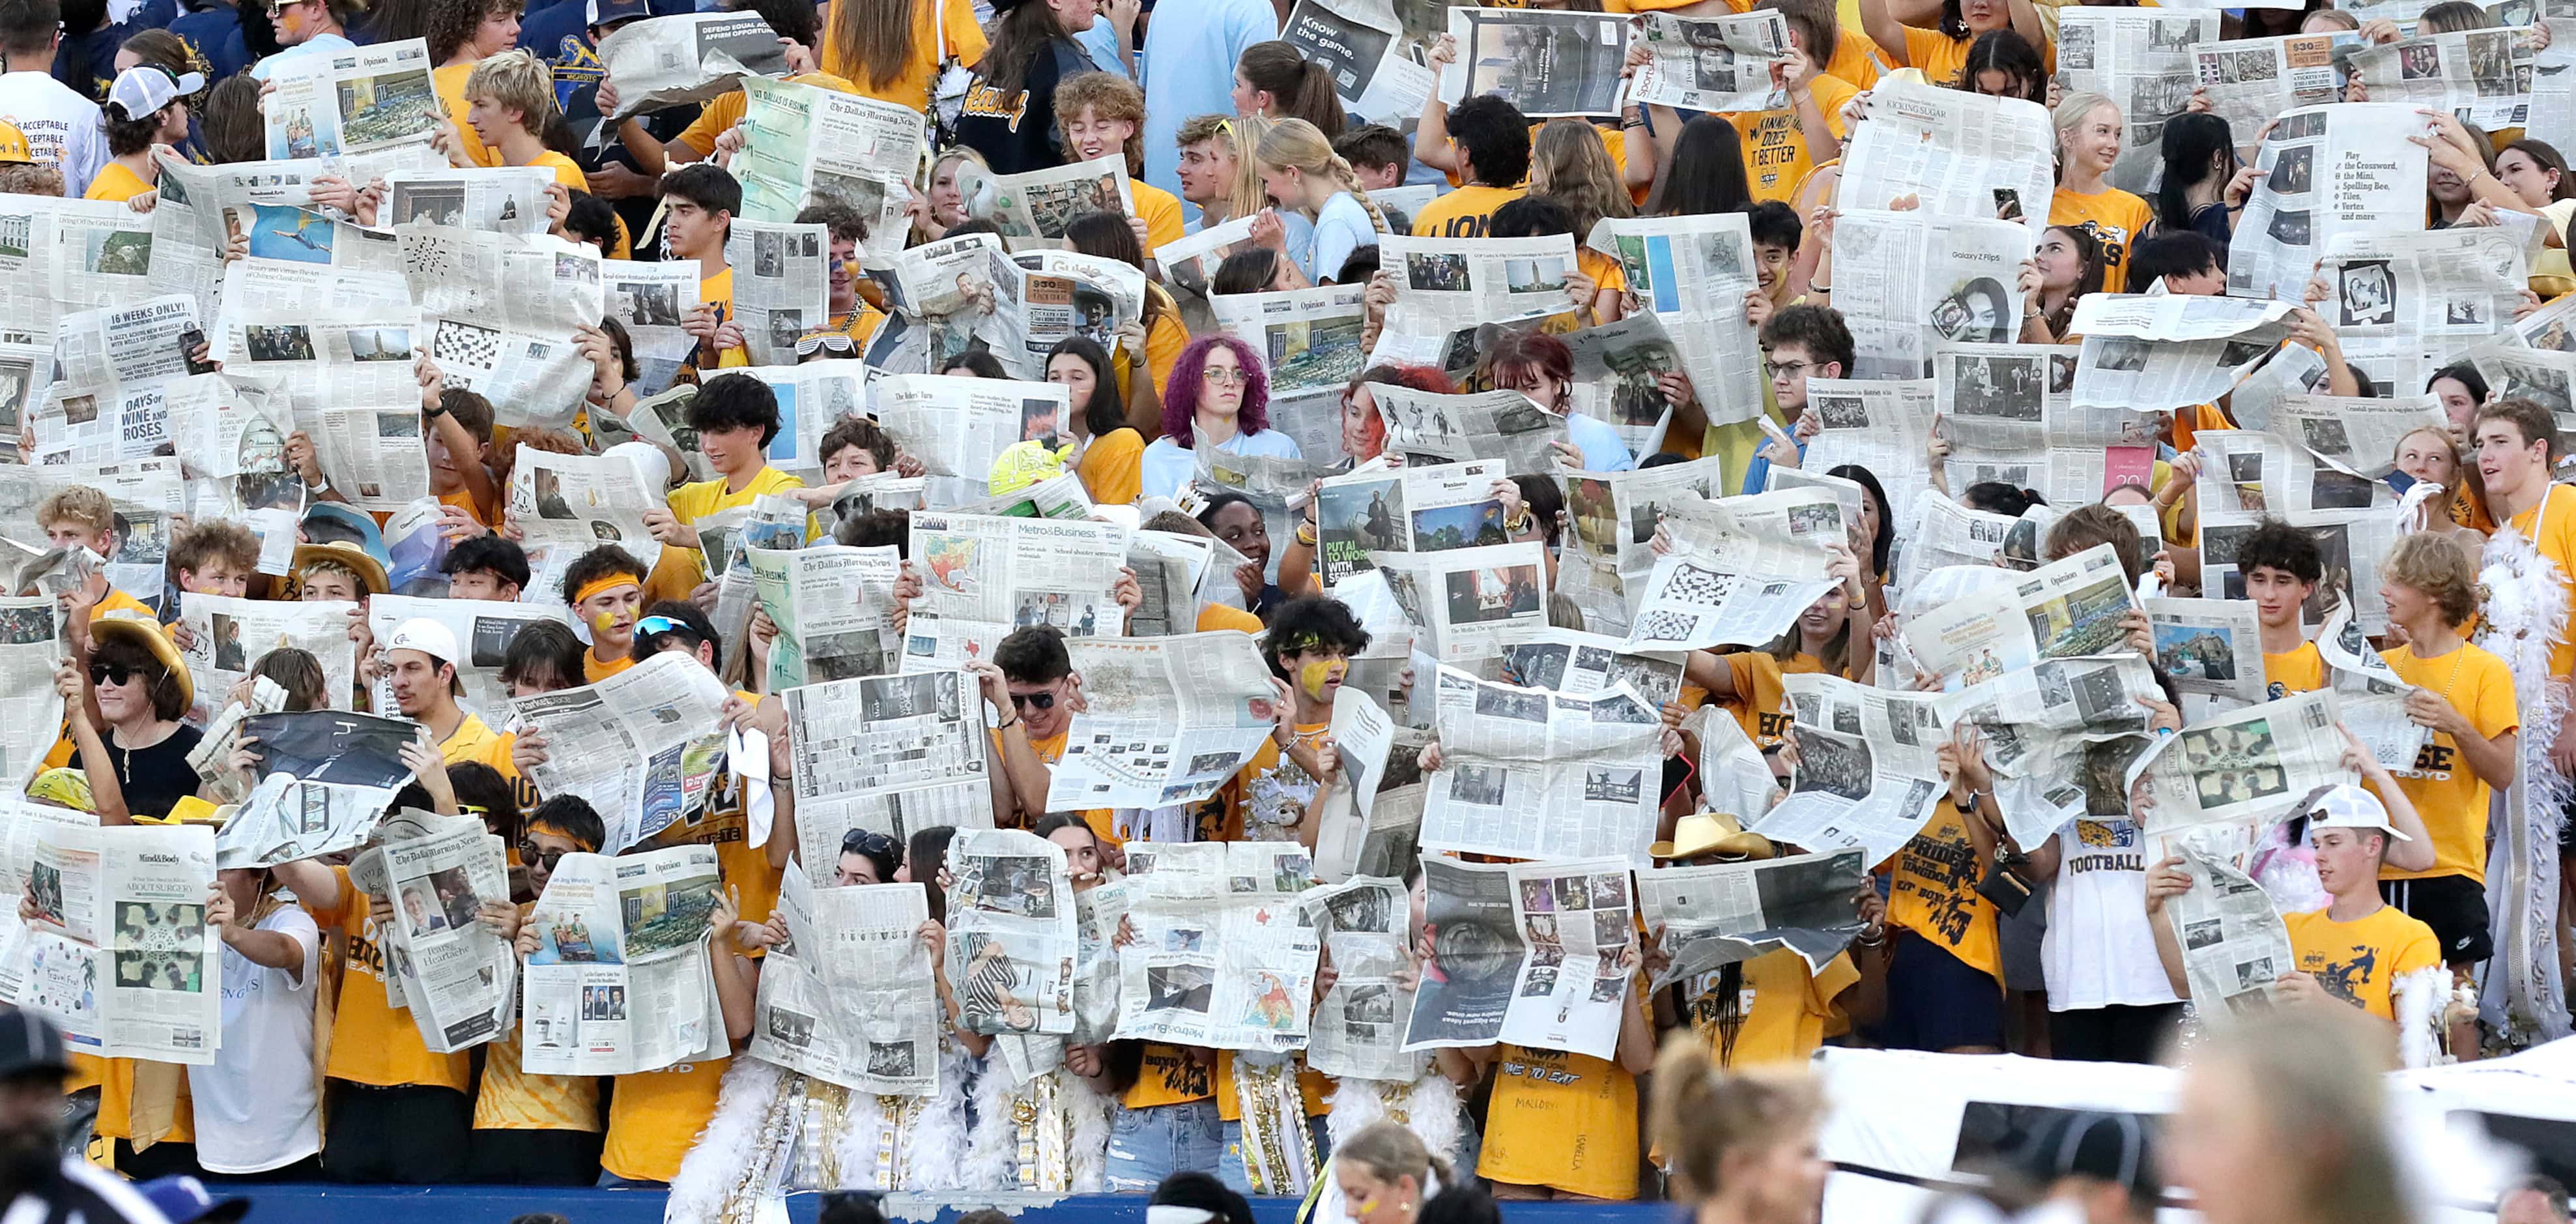 The McKinney High School student section quietly reads newspapers during the opposeing teams...